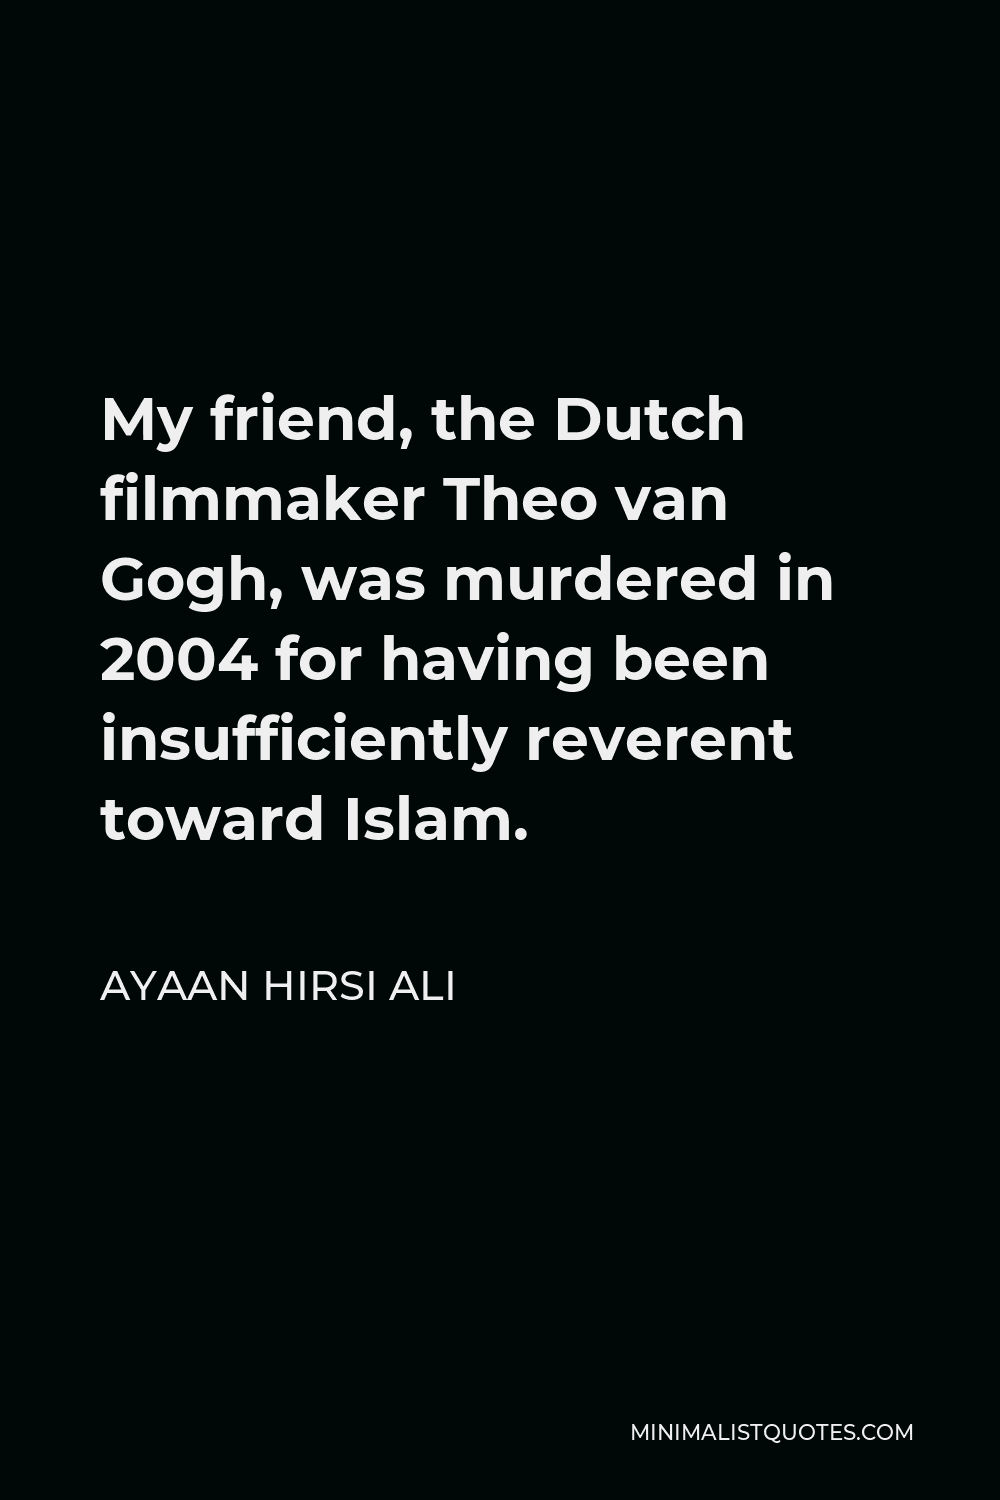 Ayaan Hirsi Ali Quote - My friend, the Dutch filmmaker Theo van Gogh, was murdered in 2004 for having been insufficiently reverent toward Islam.